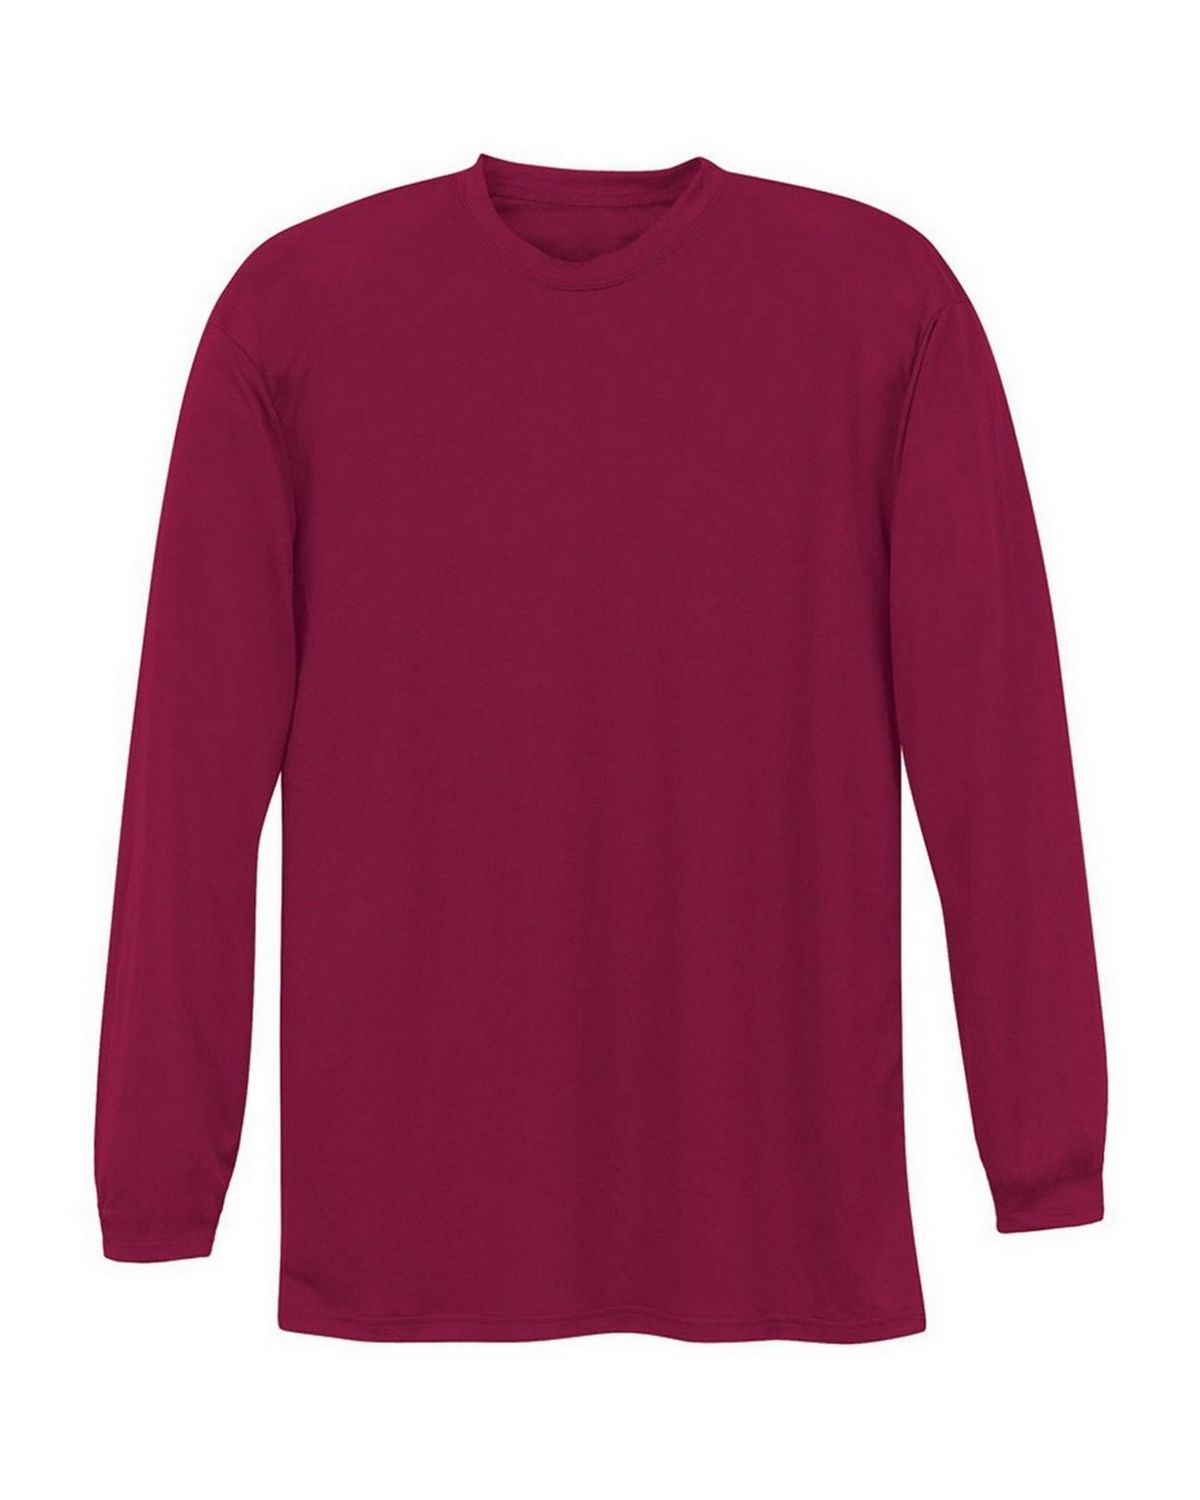 Buy A4 N3165 Adult Cooling Performance Long Sleeve Crew - Apparelnbags.com